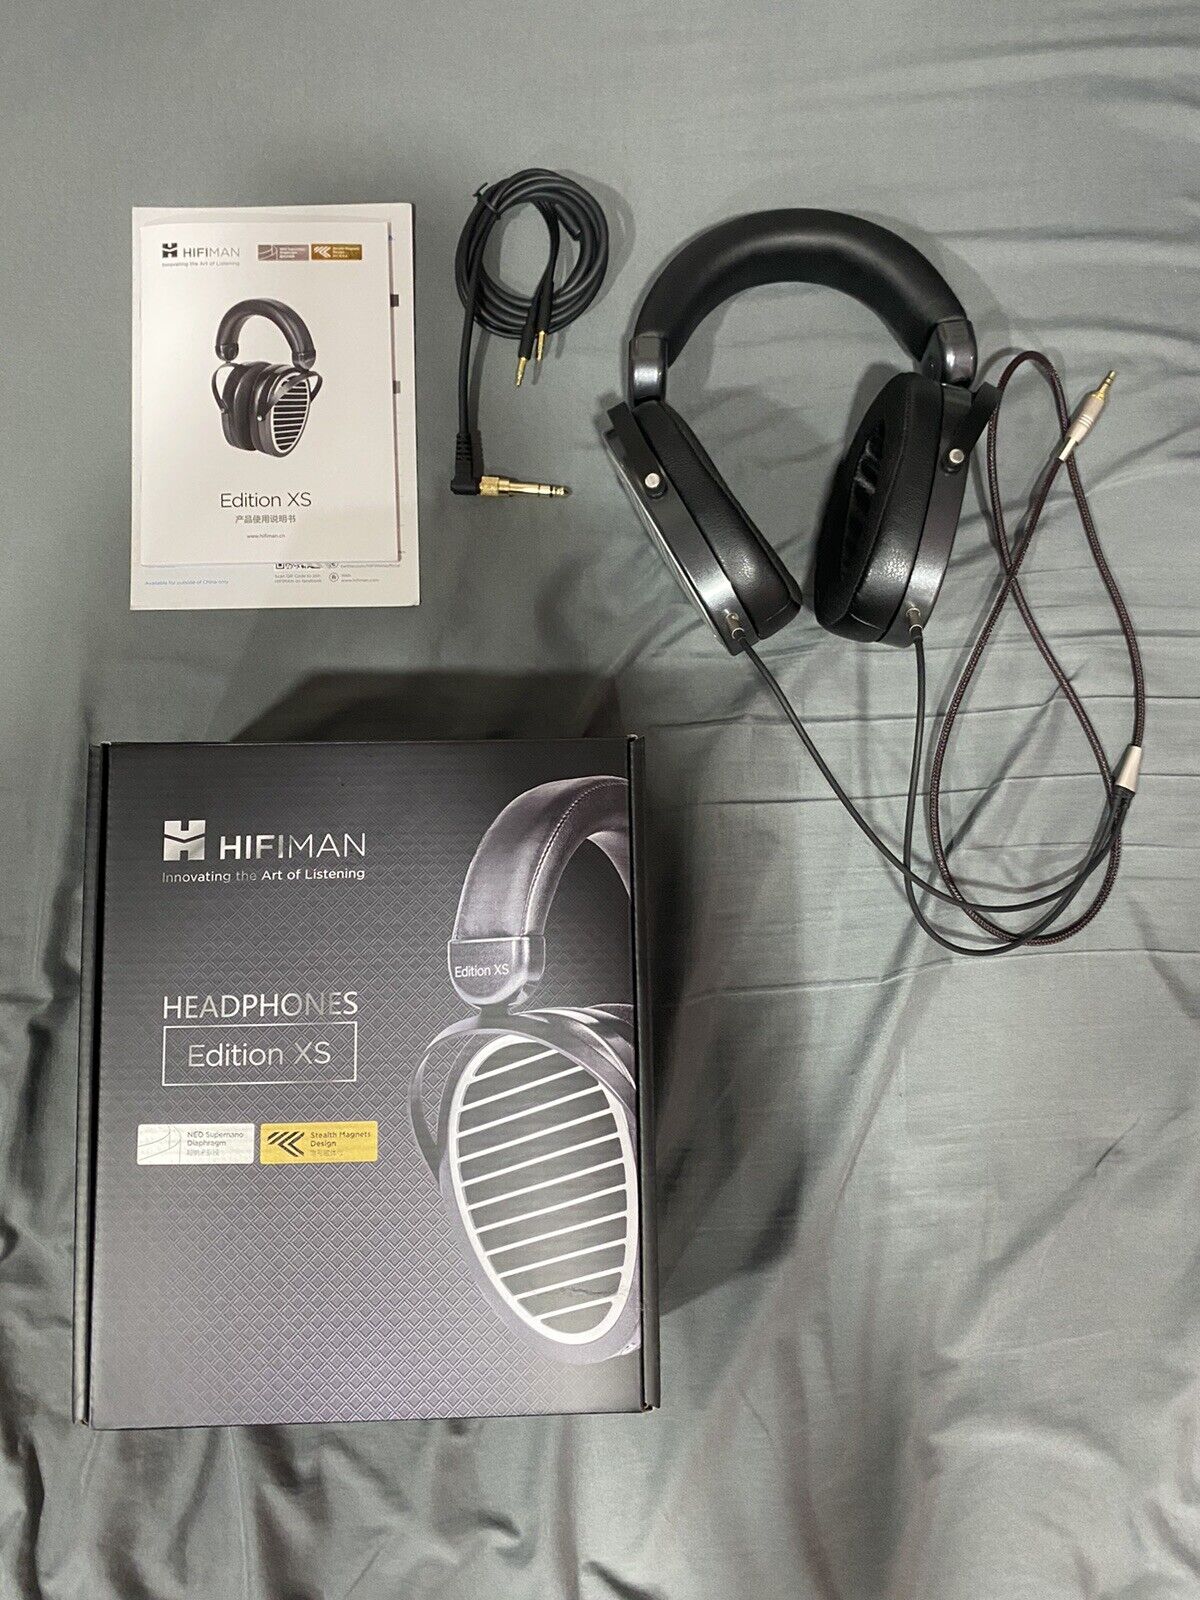 HIFIMAN Edition XS Over Ear Headphones Complete in Box